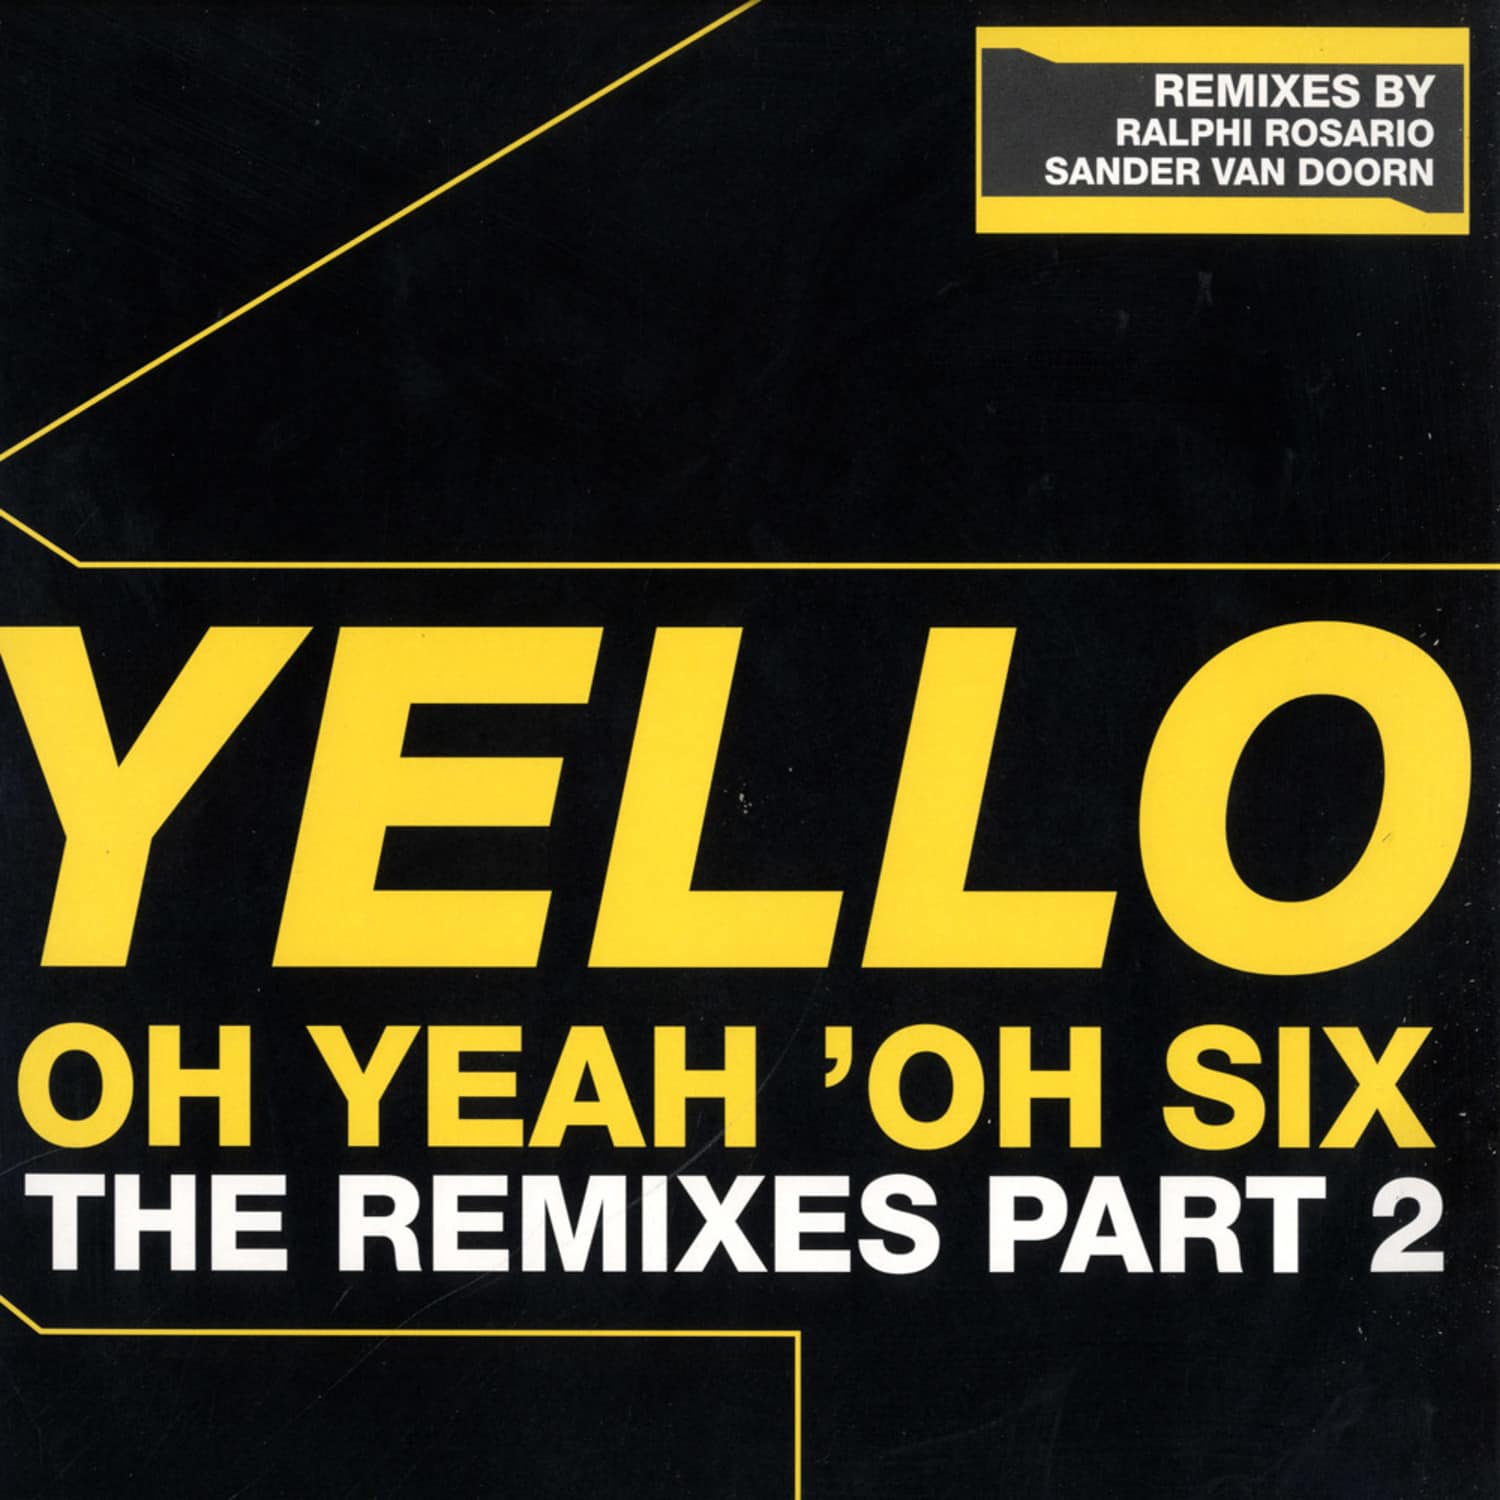 Yello - OH YEAH OH SIX PART 2